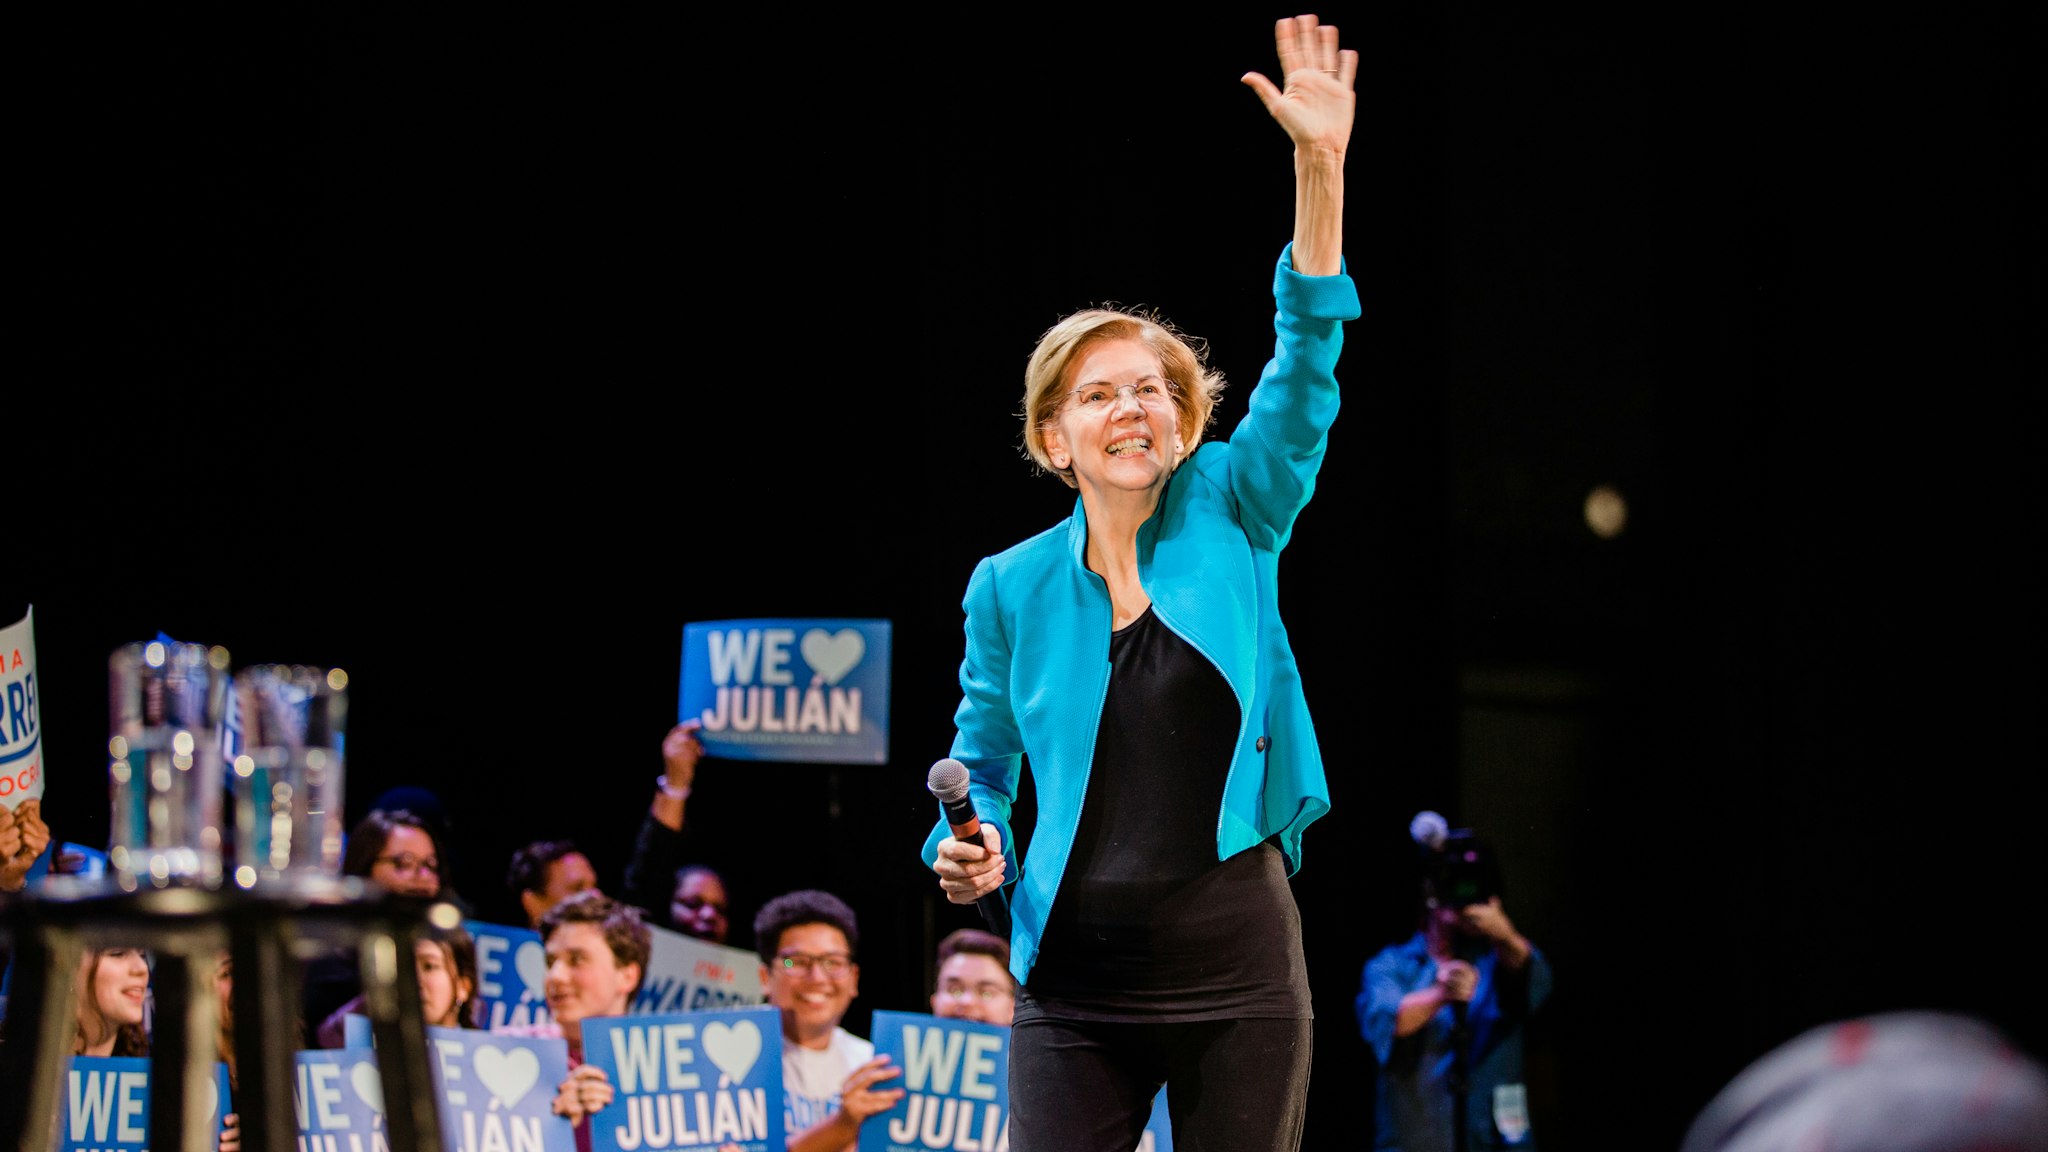 Senator Elizabeth Warren, a Democrat from Massachusetts and 2020 presidential candidate, waves to attendees during a campaign event in the Brooklyn Borough of New York, U.S., on Tuesday, Jan. 7, 2020. Warren rolled out a plan Tuesday to restore bankruptcy protections repealed in a 2005 law championed by Joe Biden, taking an implicit shot at the Democratic presidential front-runner just weeks before the first nominating contests next month. Photographer: Gabriela Bhaskar/Bloomberg via Getty Images